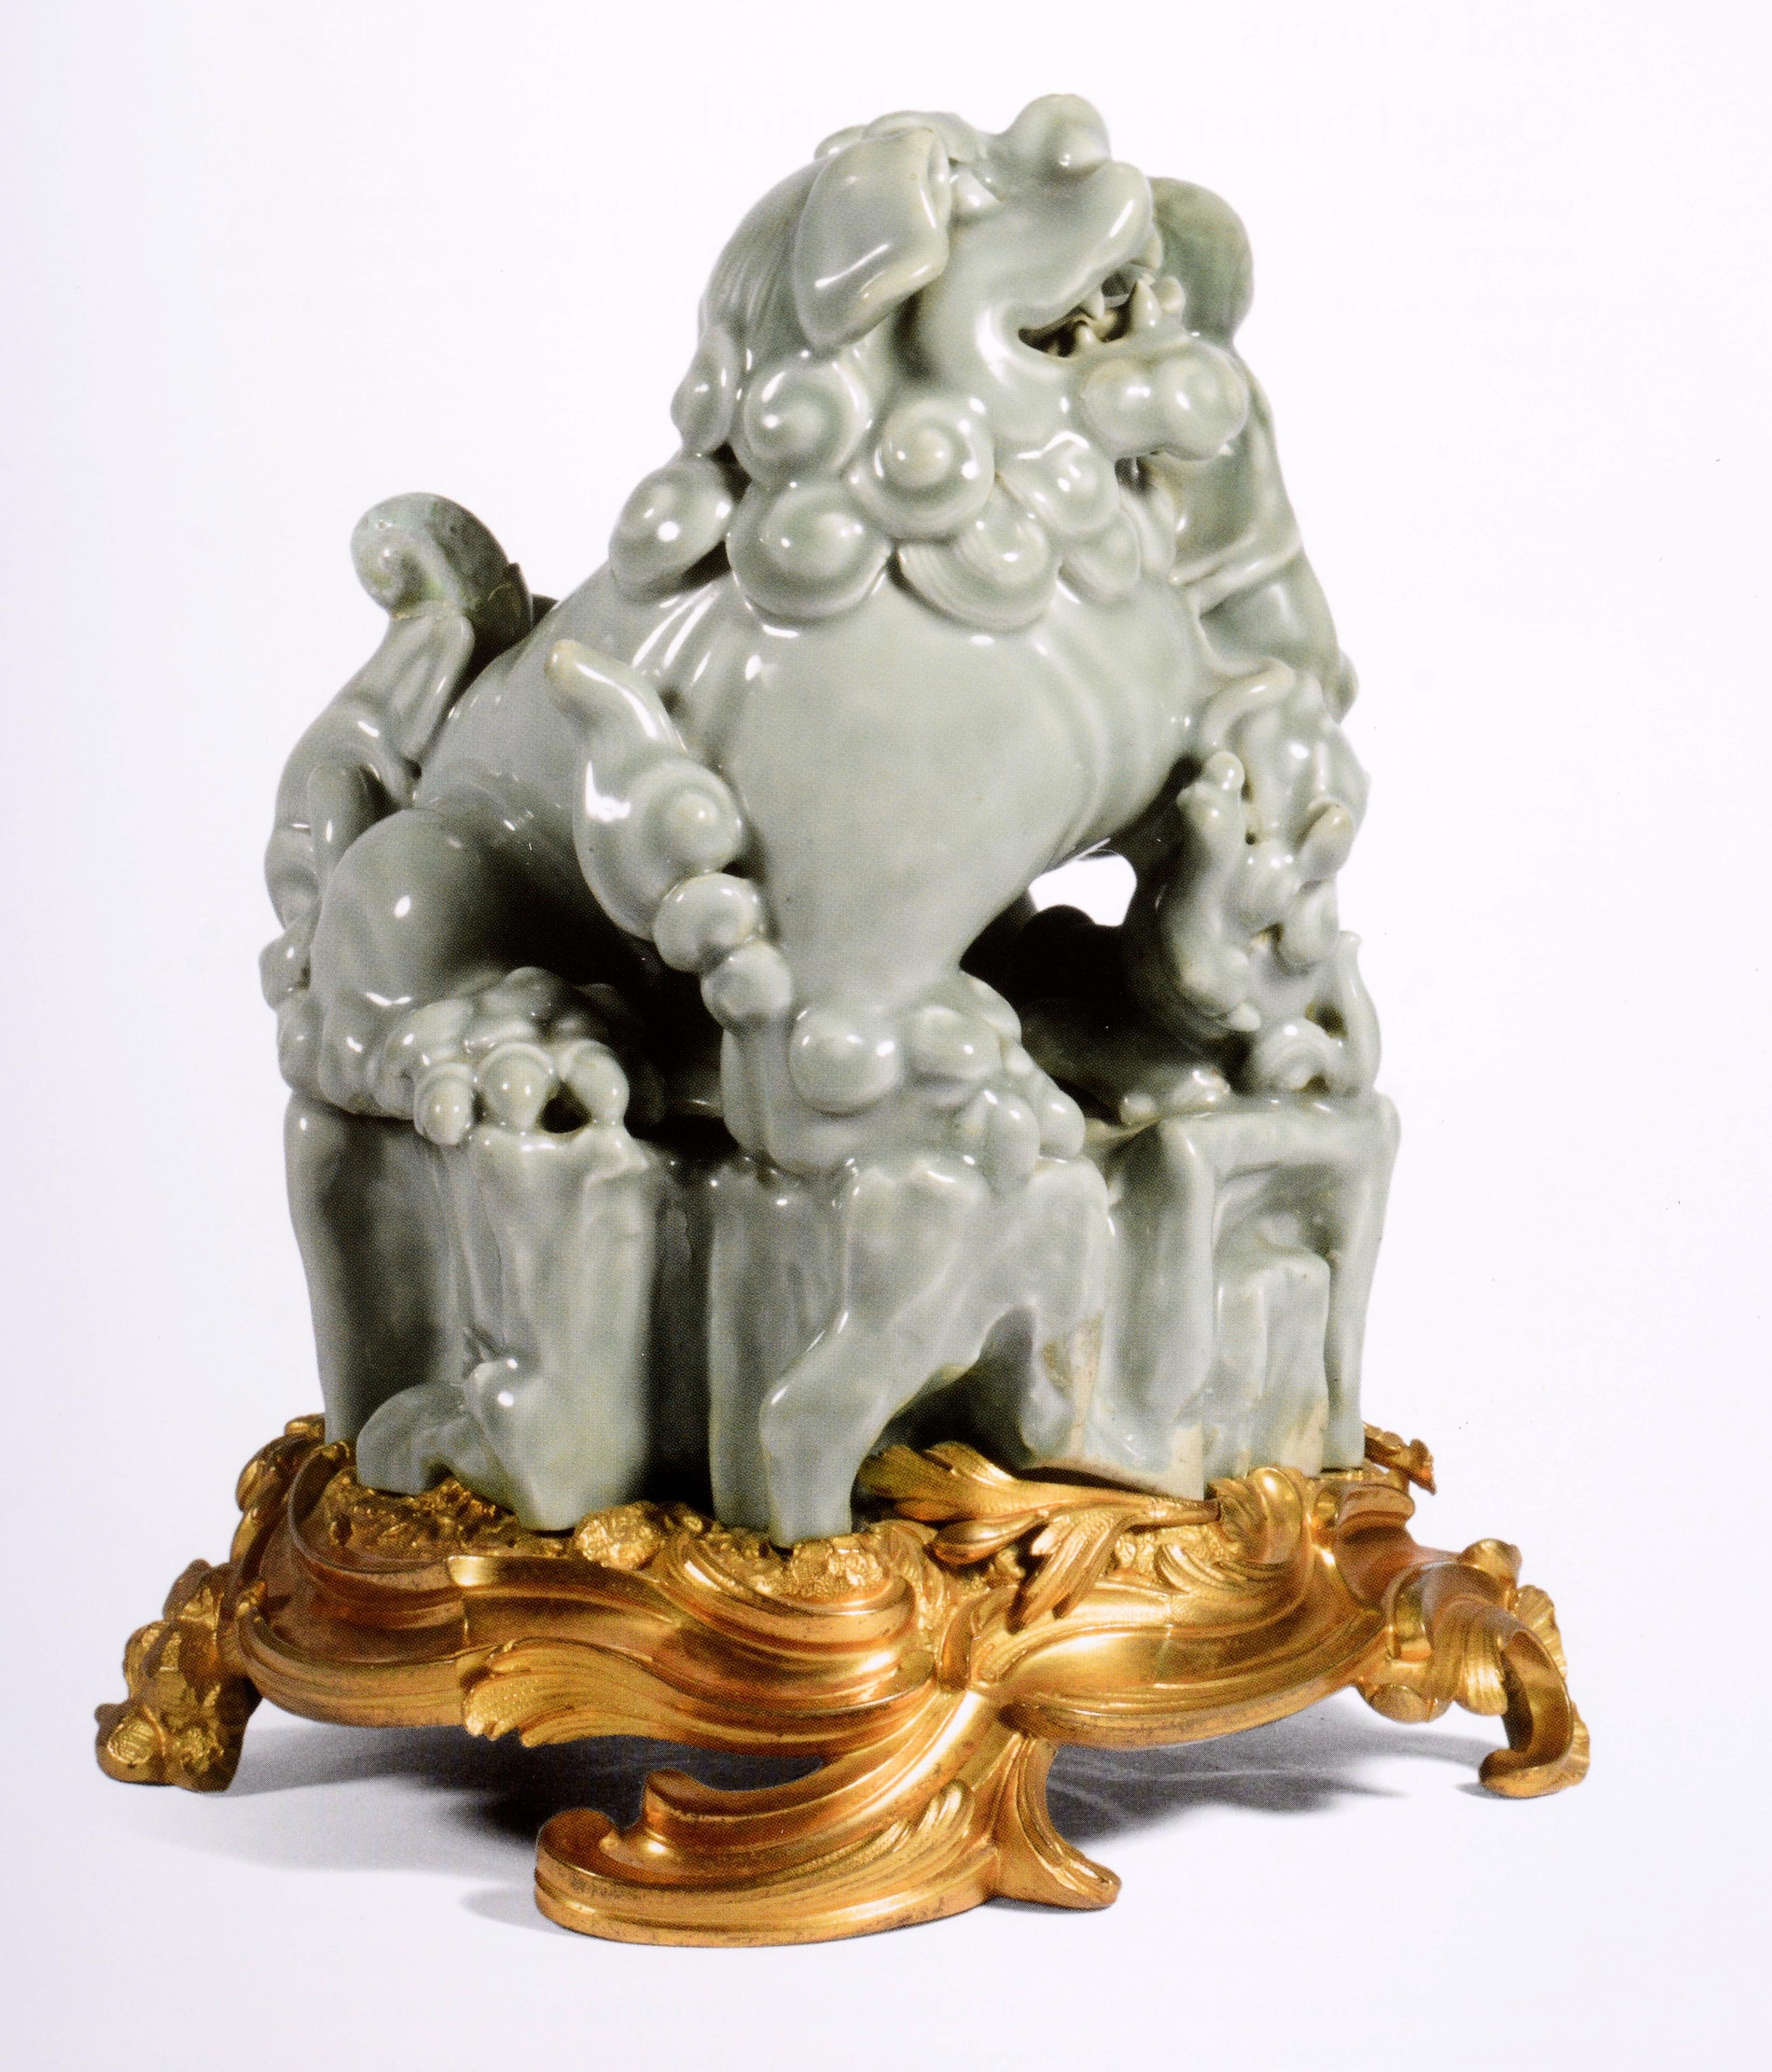 English Treasures of the Qing Court, a Personal Perspective London 7 Nov. 2012 Sotheby's For Sale